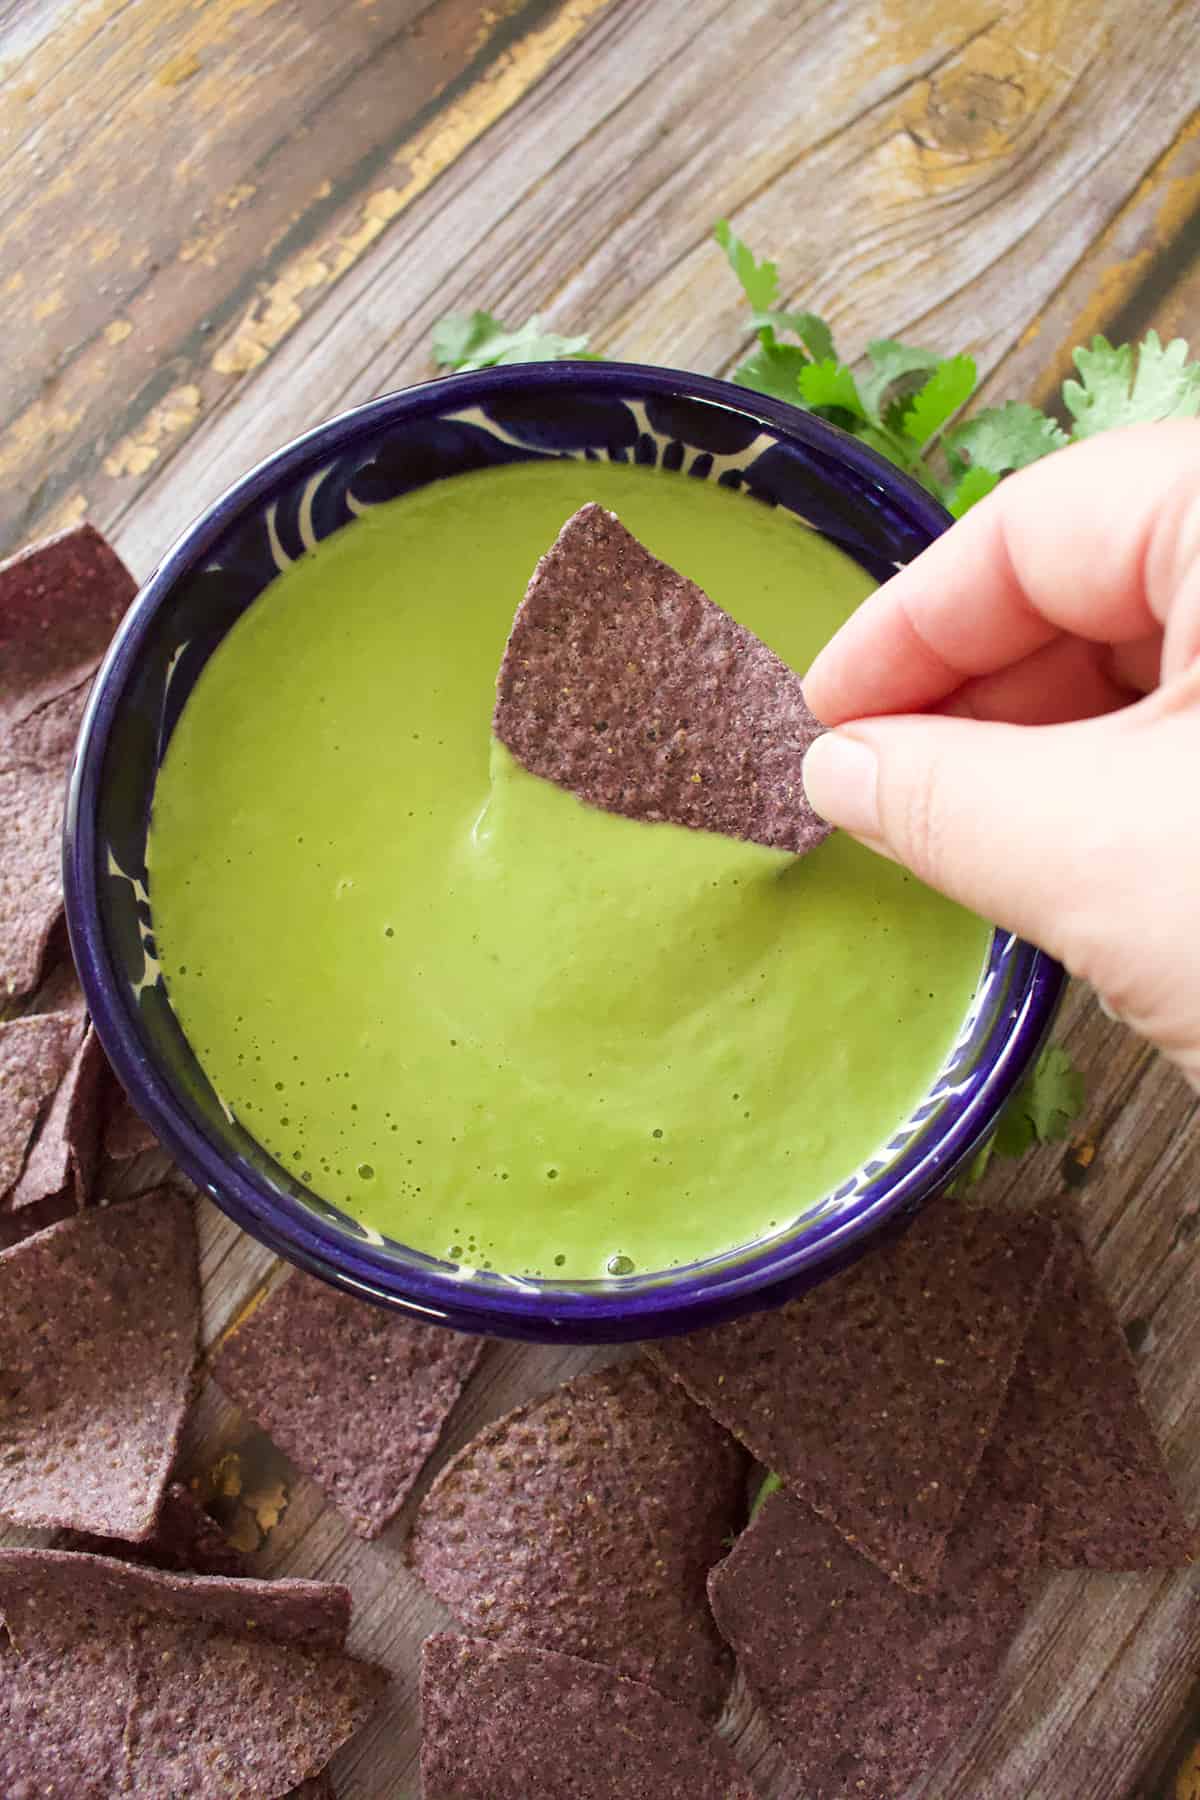 A hand dipping a tortilla chip into a bowl of jalapeno salsa.